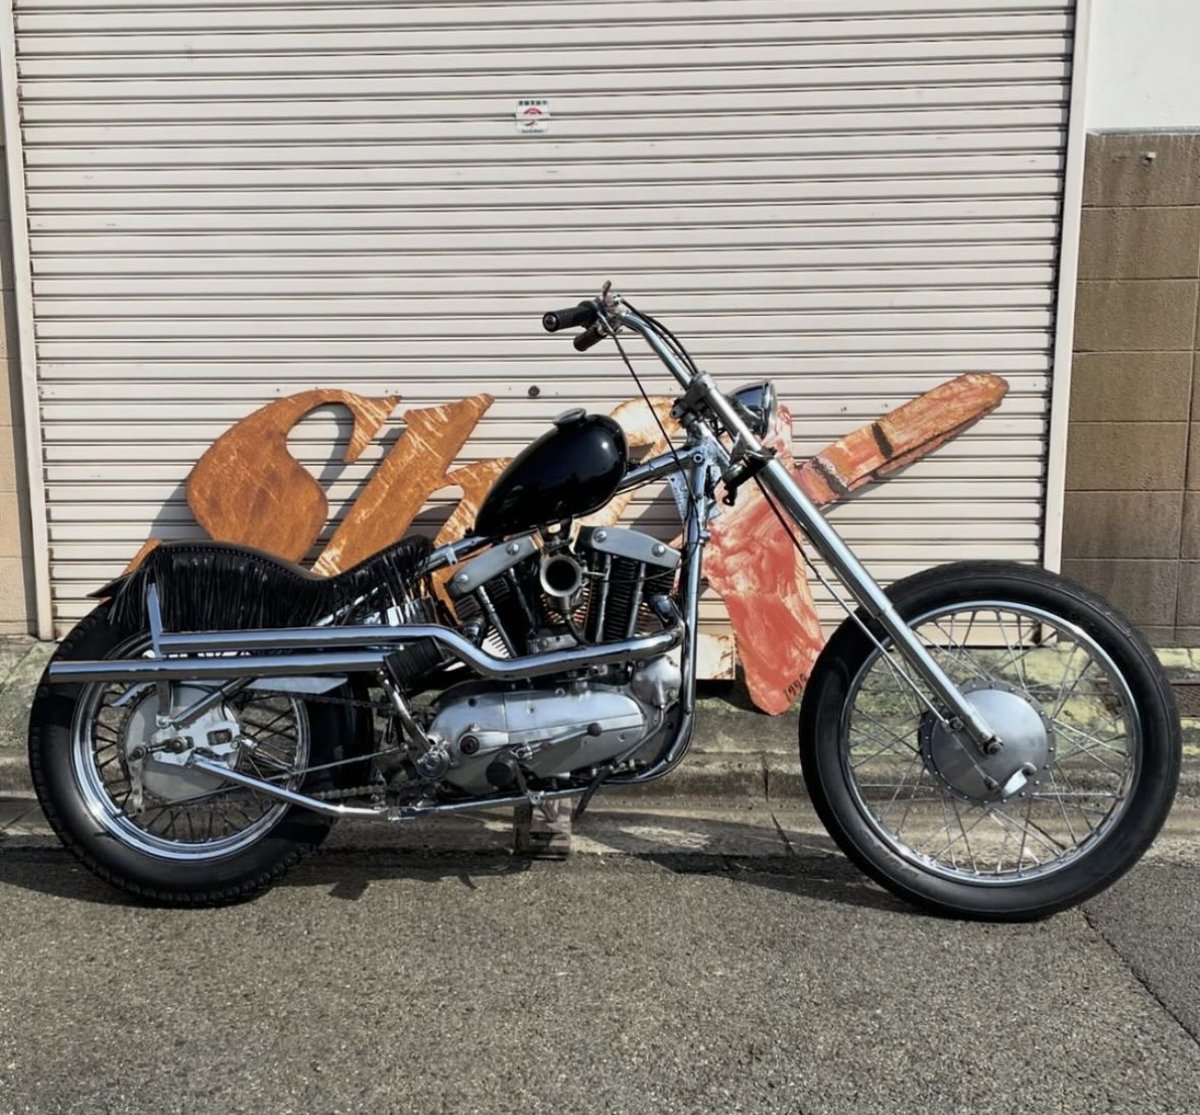 This ironhead from @shixmotorcycle is pretty rad. love the chrome frame, long high shotgun pipes, fringe seat, and stance. Style For Days.. #choppershit #ironhead #chopper #ironheadchoppers #ironheachoppers #moto #hd #harley #chopshit